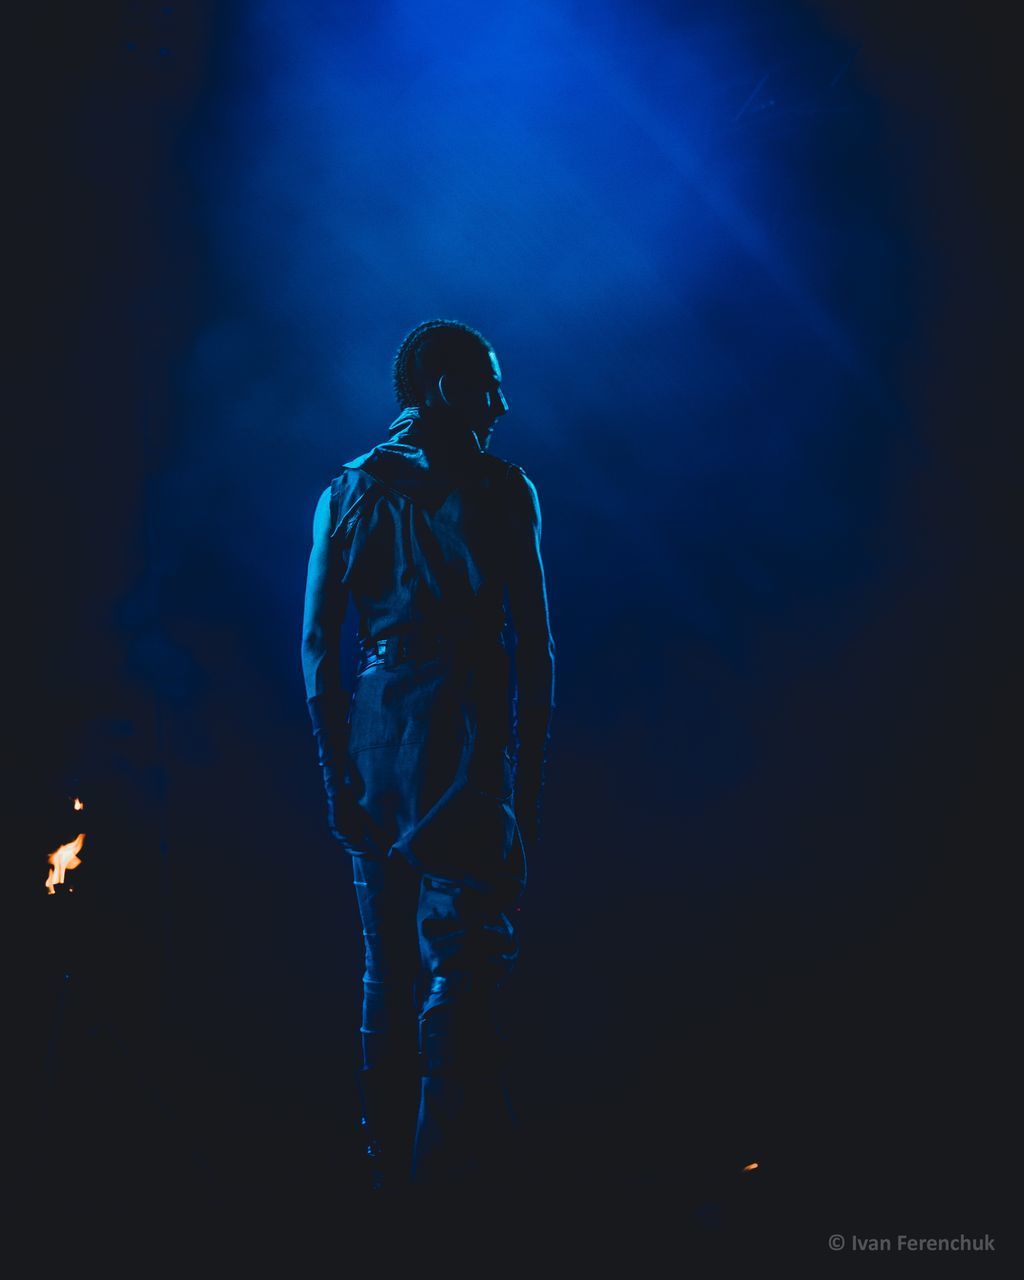 night, one person, illuminated, standing, full length, young adult, real people, three quarter length, performance, blue, front view, lifestyles, arts culture and entertainment, stage - performance space, young men, light - natural phenomenon, indoors, clothing, stage, nightlife